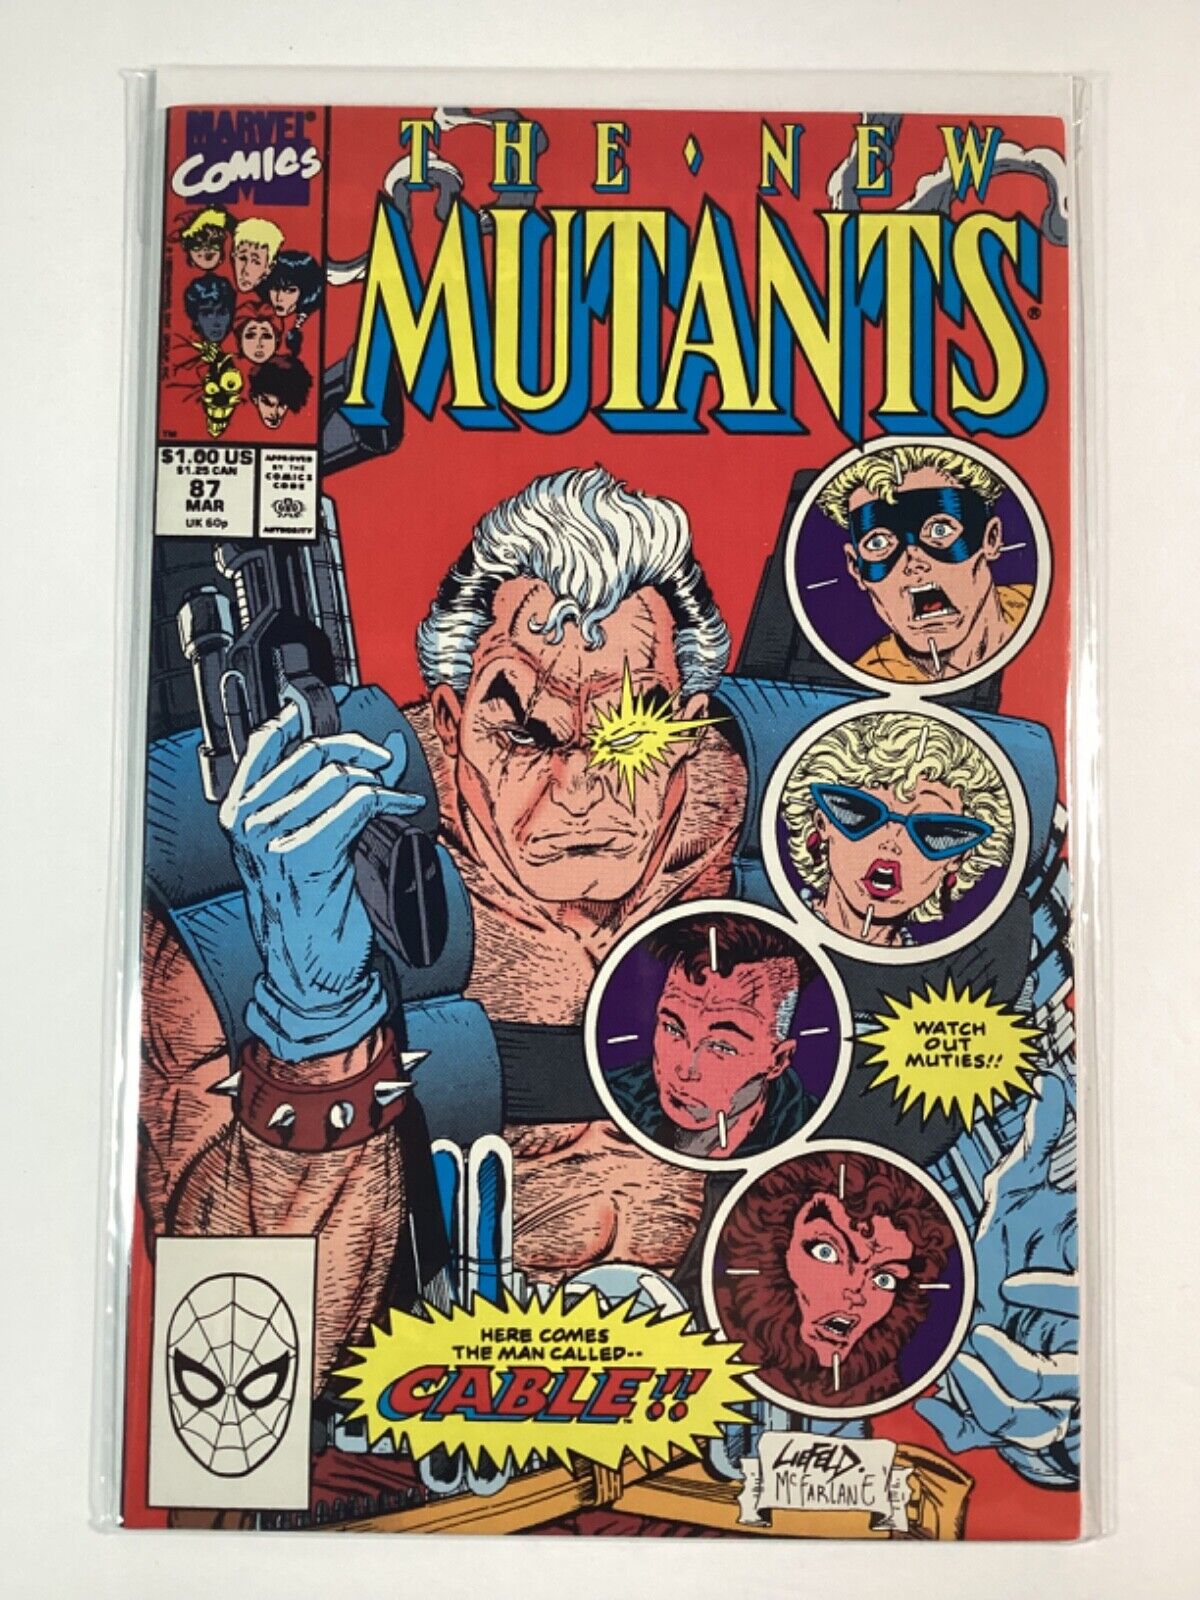 NEW MUTANTS 1983 1st Series #87 VF- 7.5🥇1st FULL APP OF CABLE=NATHAN SUMMERS🥇